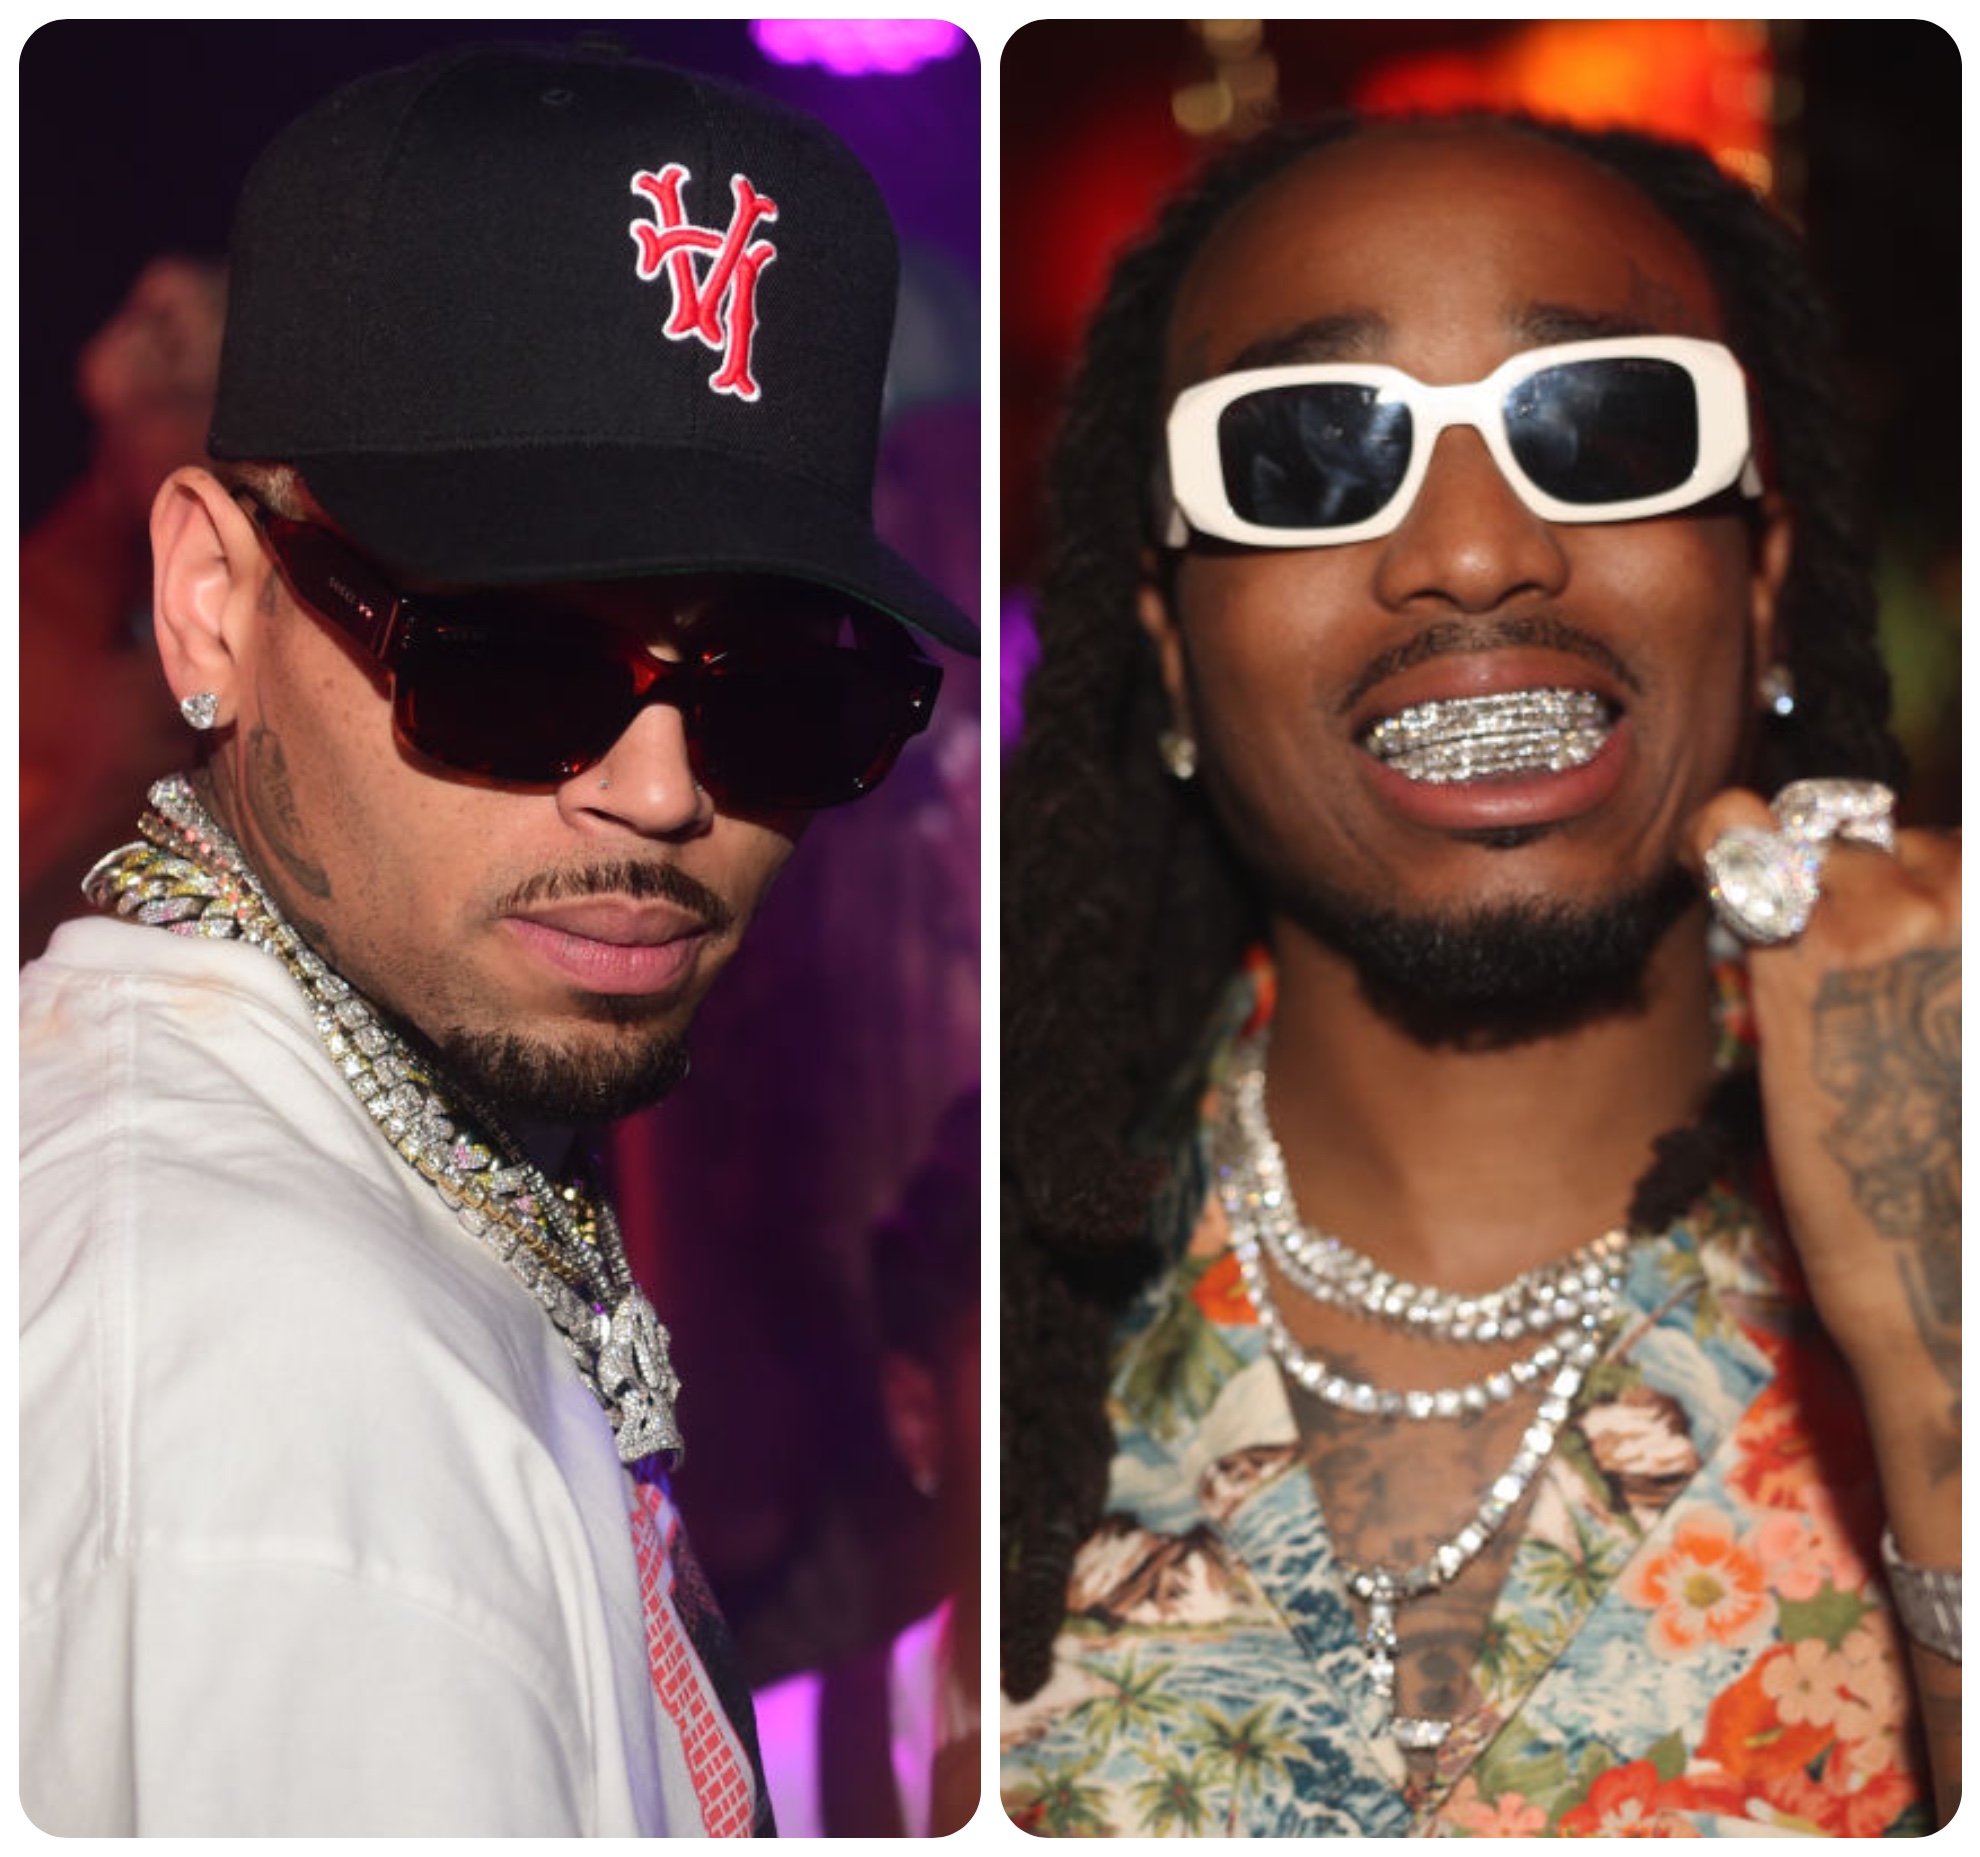 Bhris Brown Brings Bombastic Bars To Quavo About Allegedly Smashing Saweetie To ‘Icy Grl’ Granules, Gets ‘Weakest…